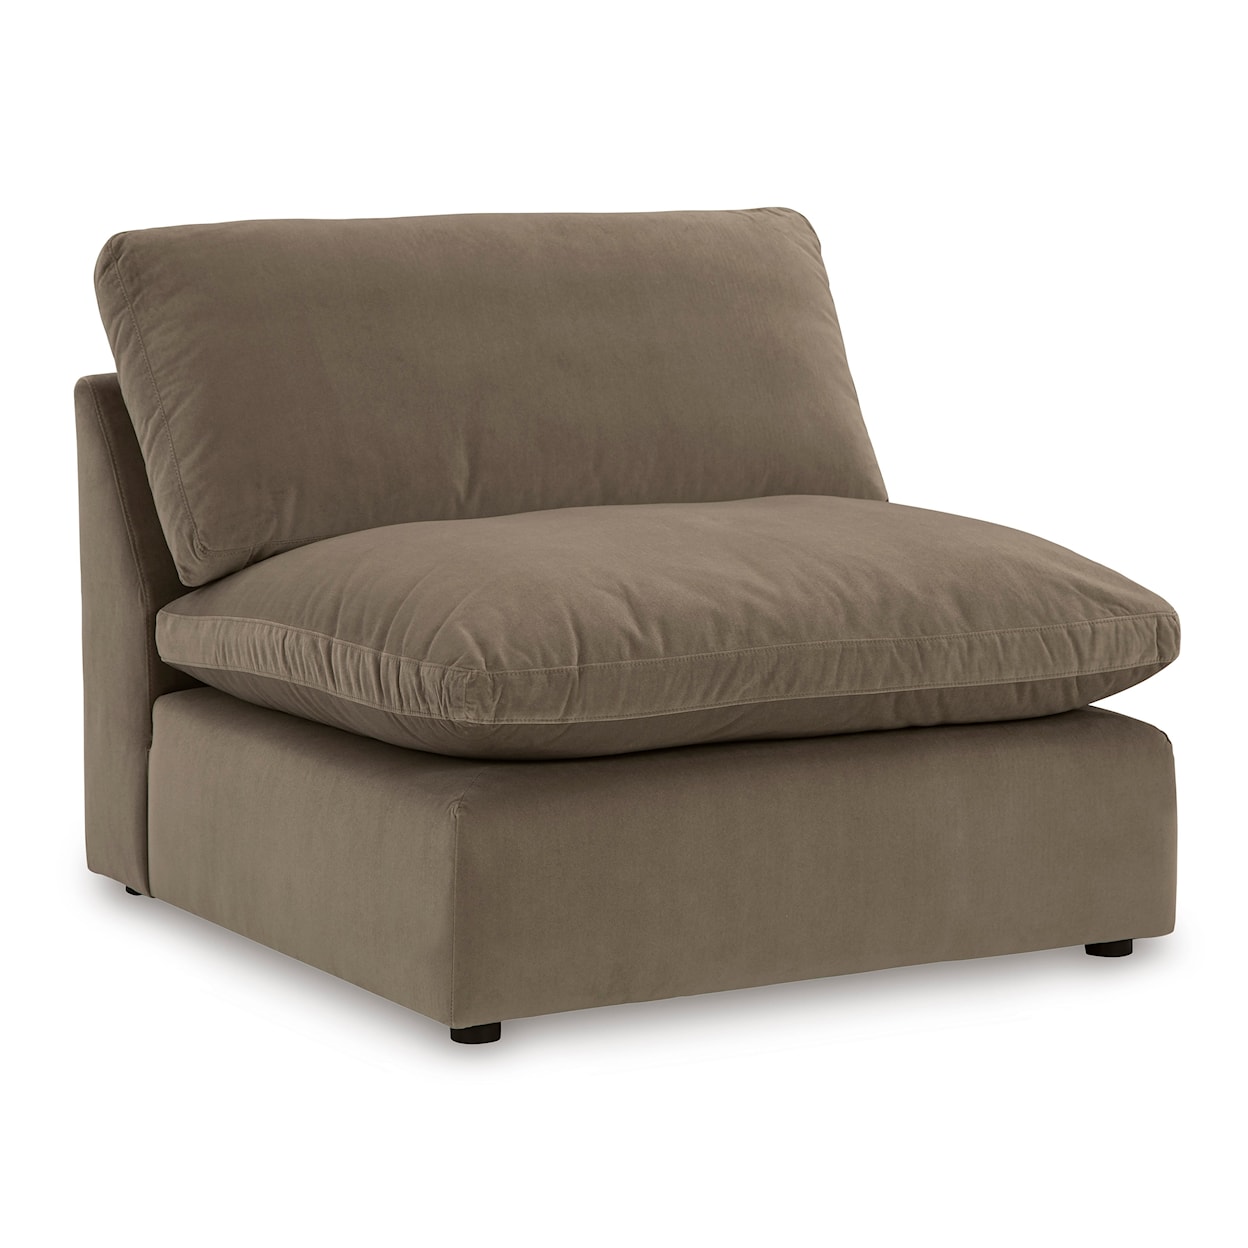 Michael Alan Select Sophie Armless Chair